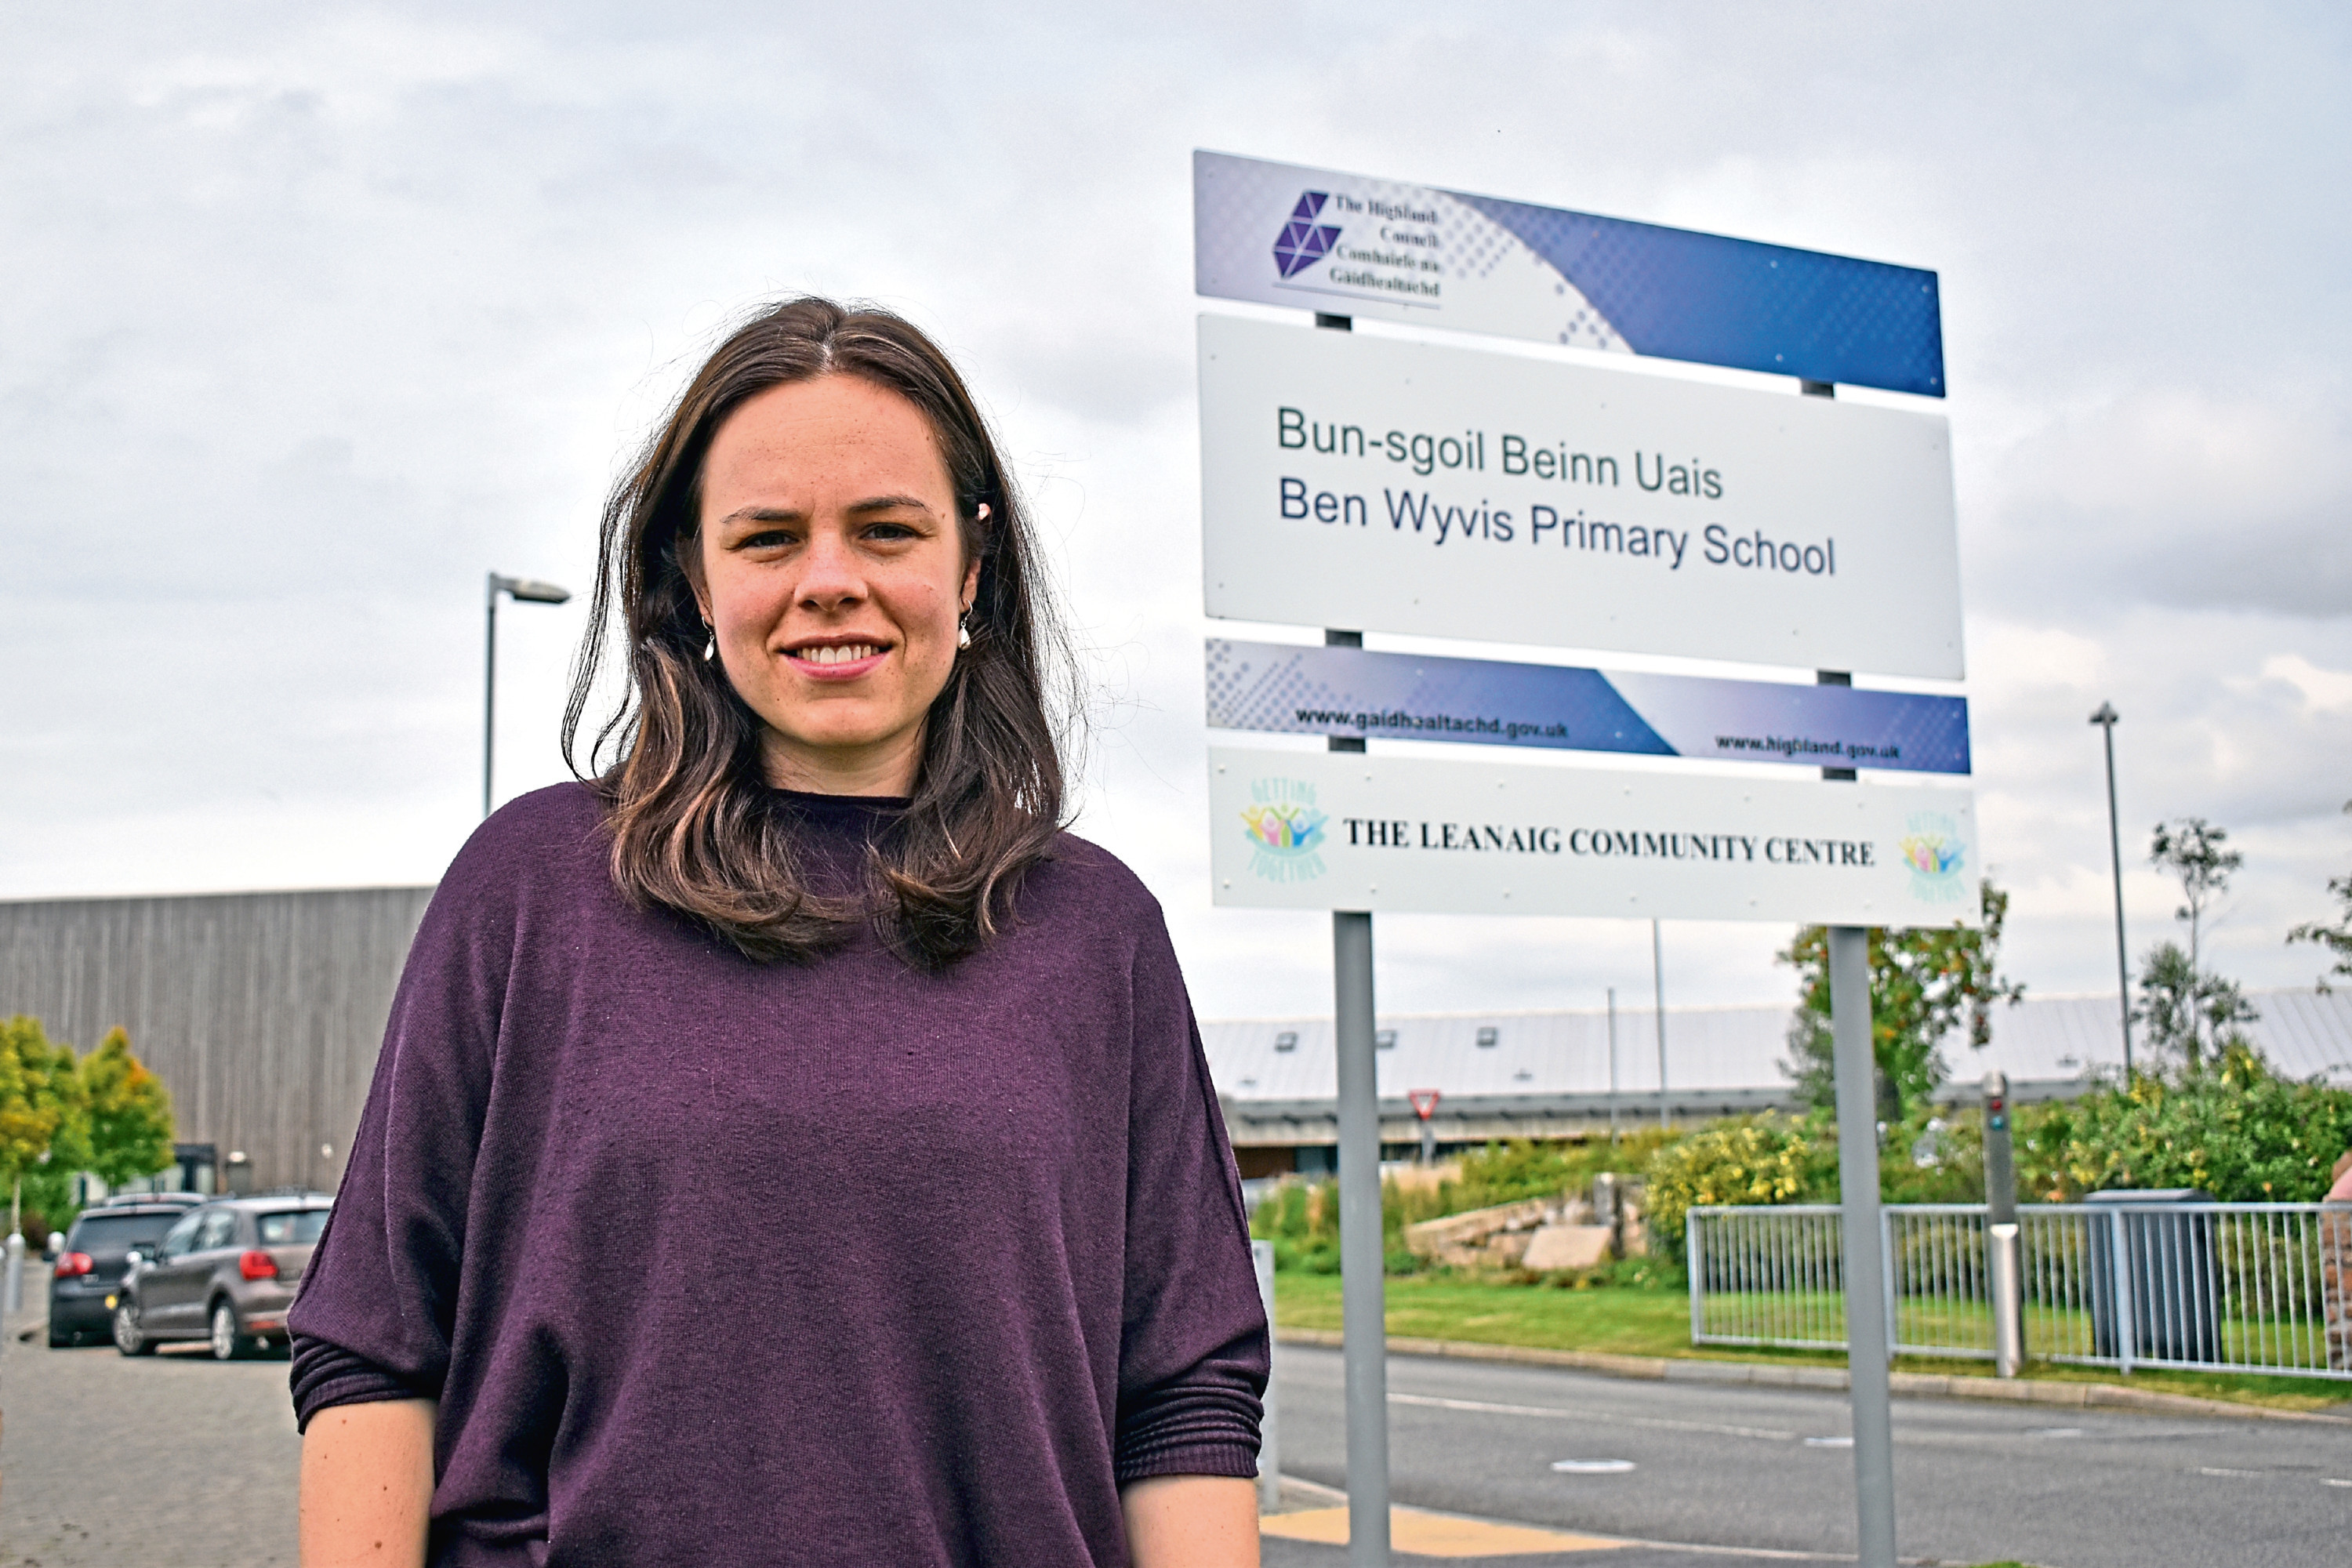 Kate Forbes outside Ben Wyvis Primary School